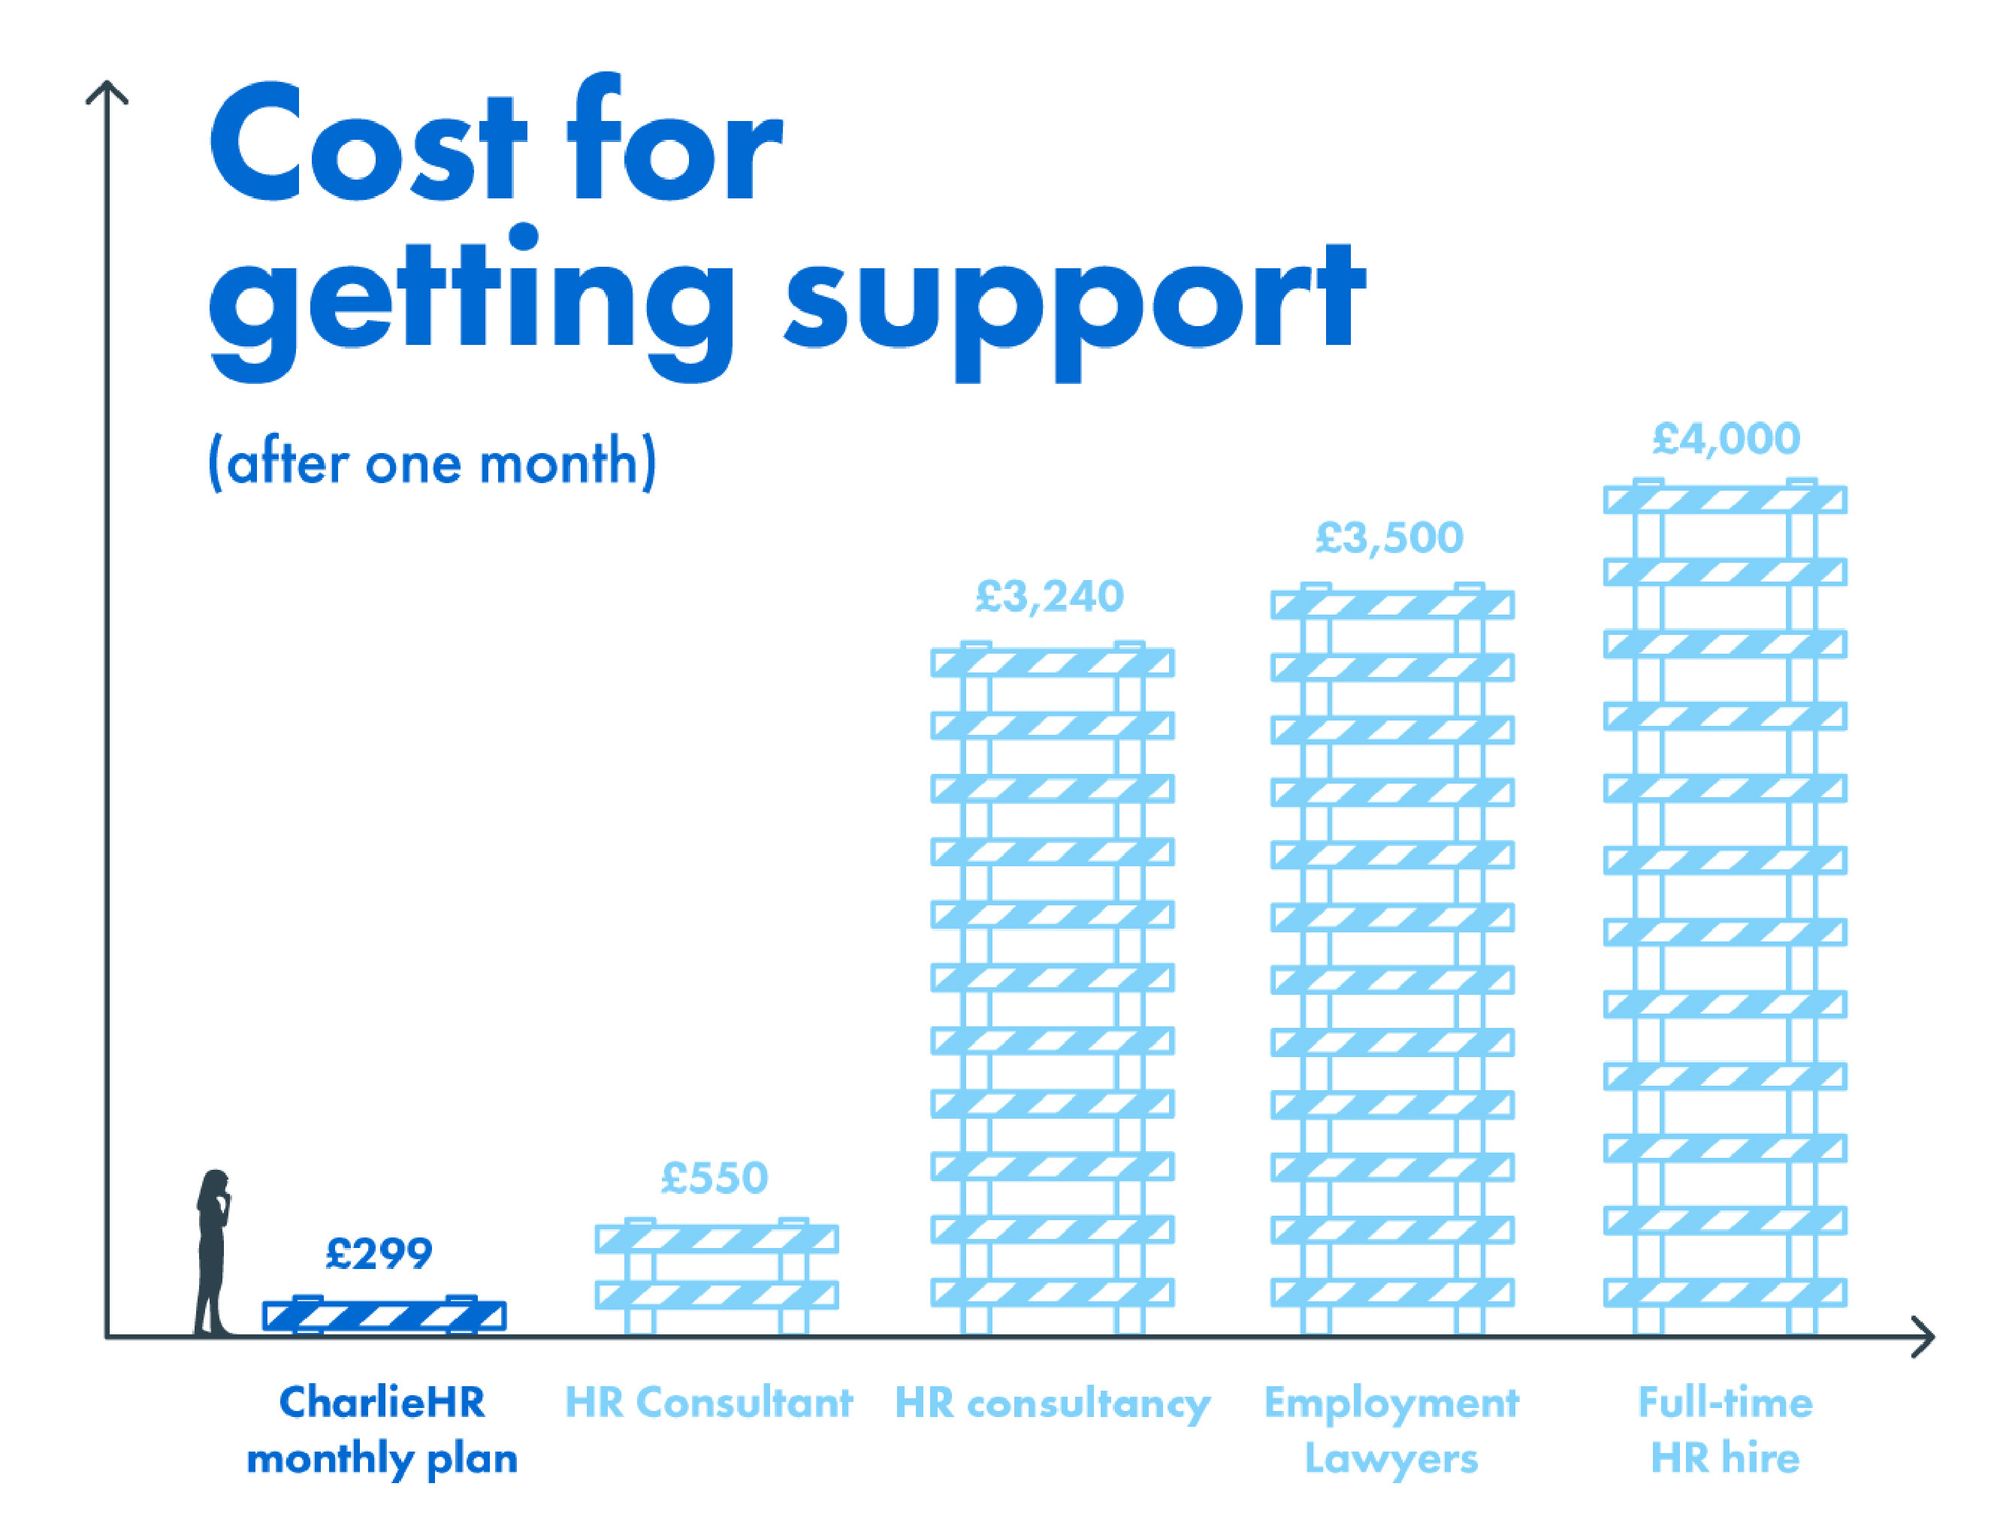 Cost of a full time HR £4000 compared to CharlieHR monthly plan £299